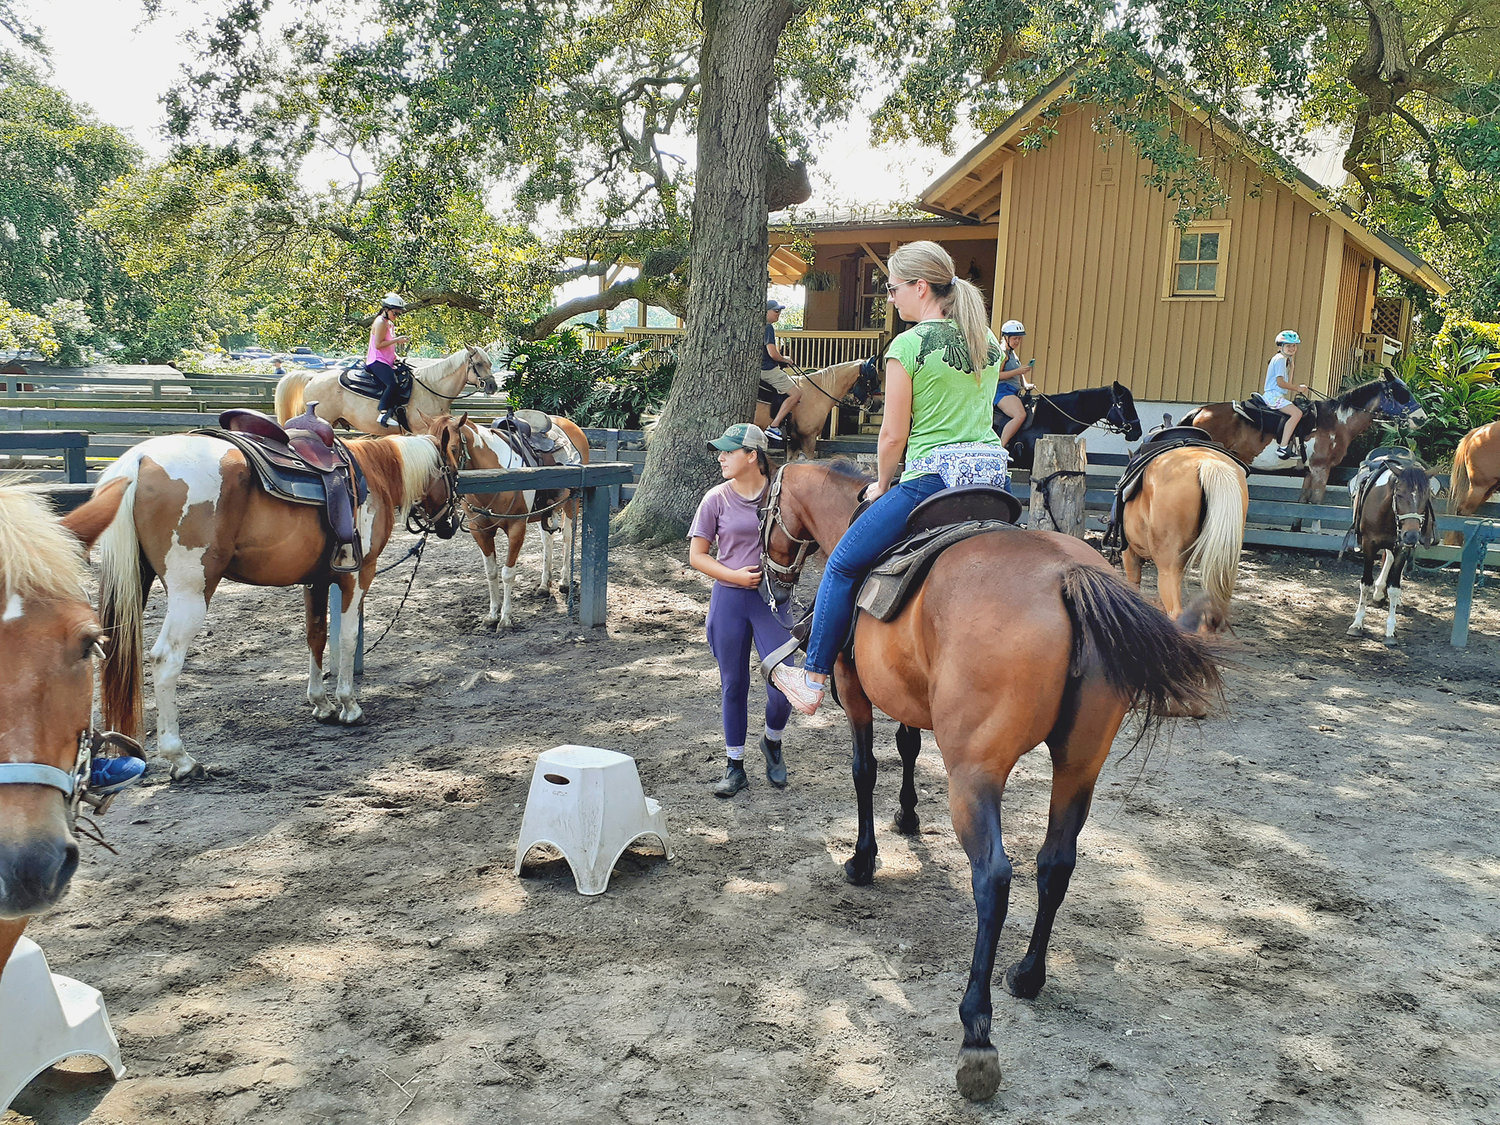 Horse riding stables provide stools for easy and safe mounting and dismounting.